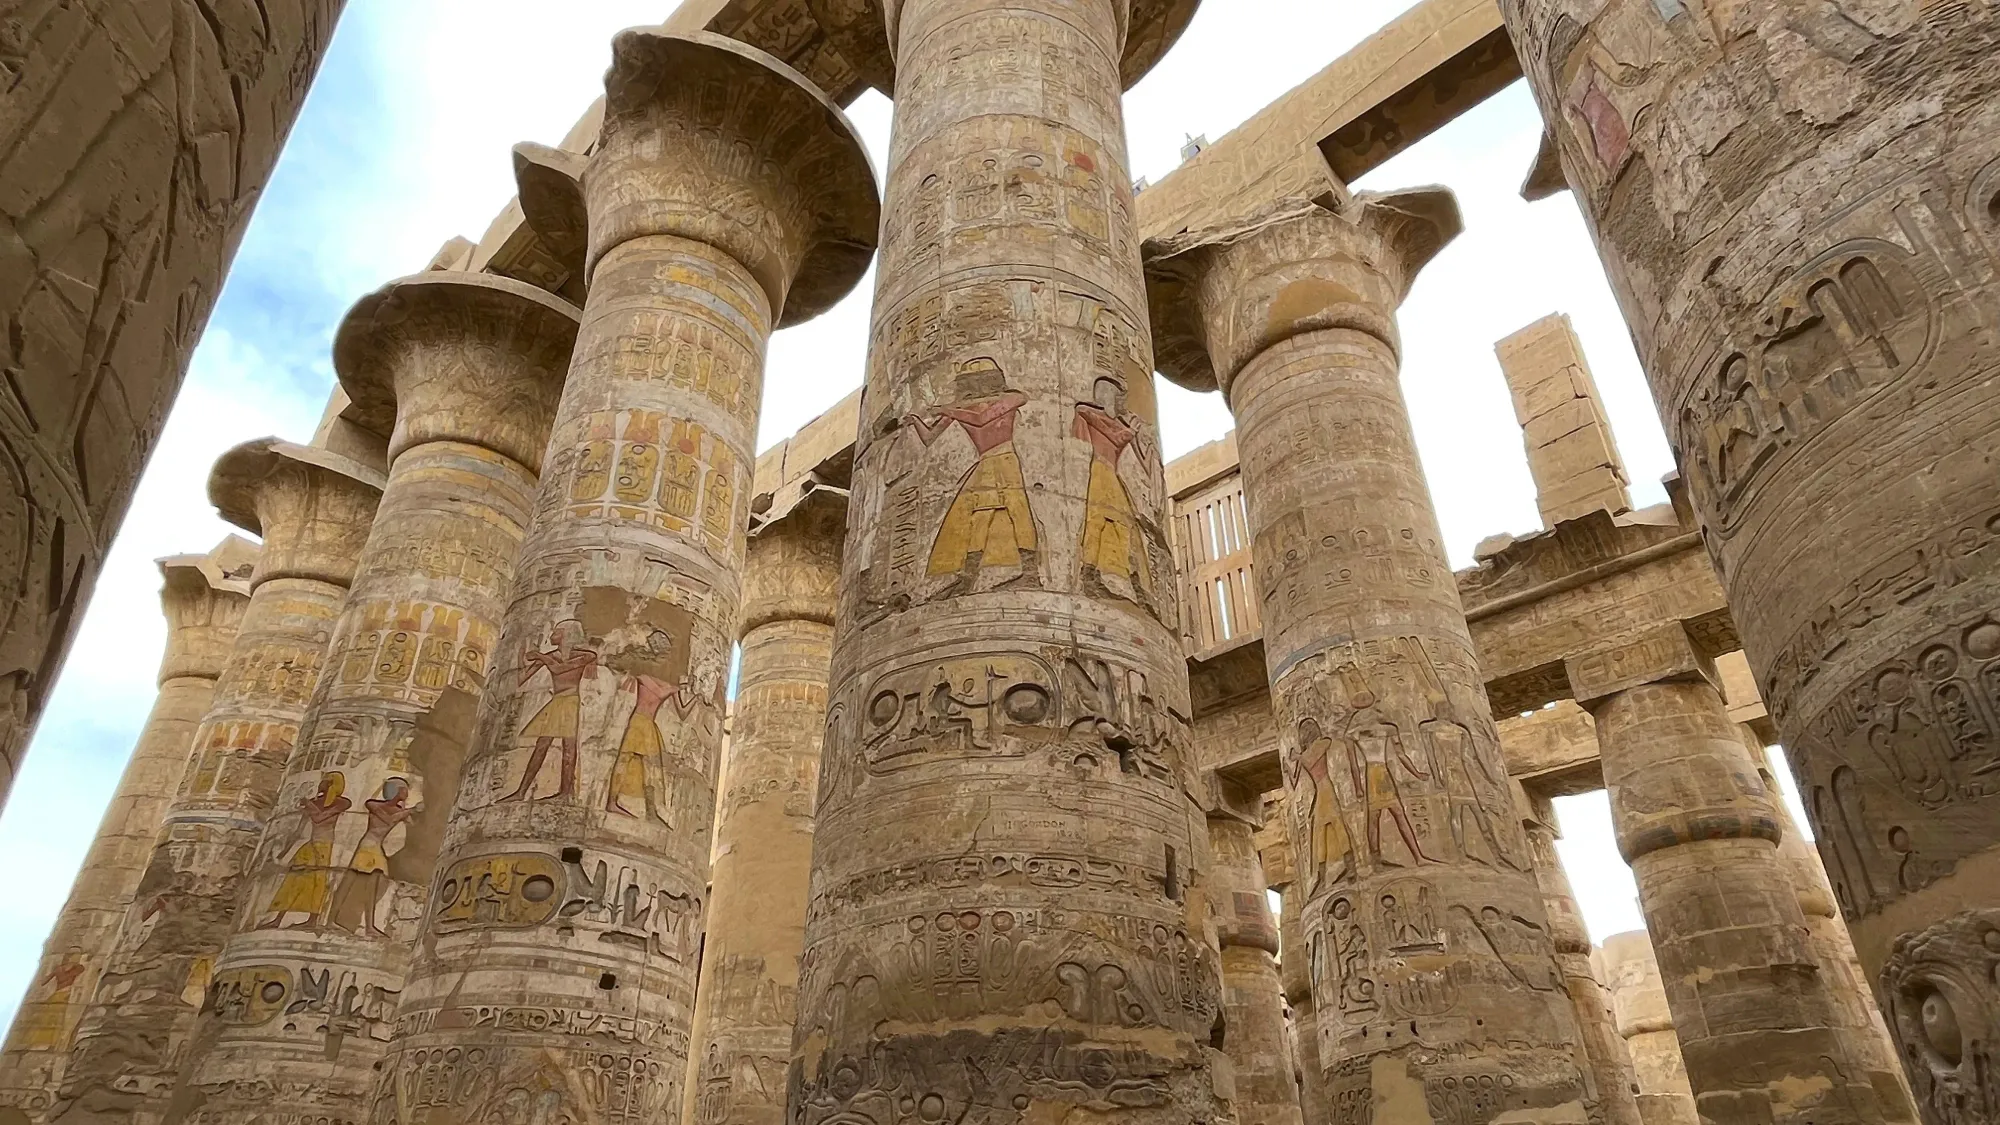 Painted and carved pillars in the Hypostyle Hall